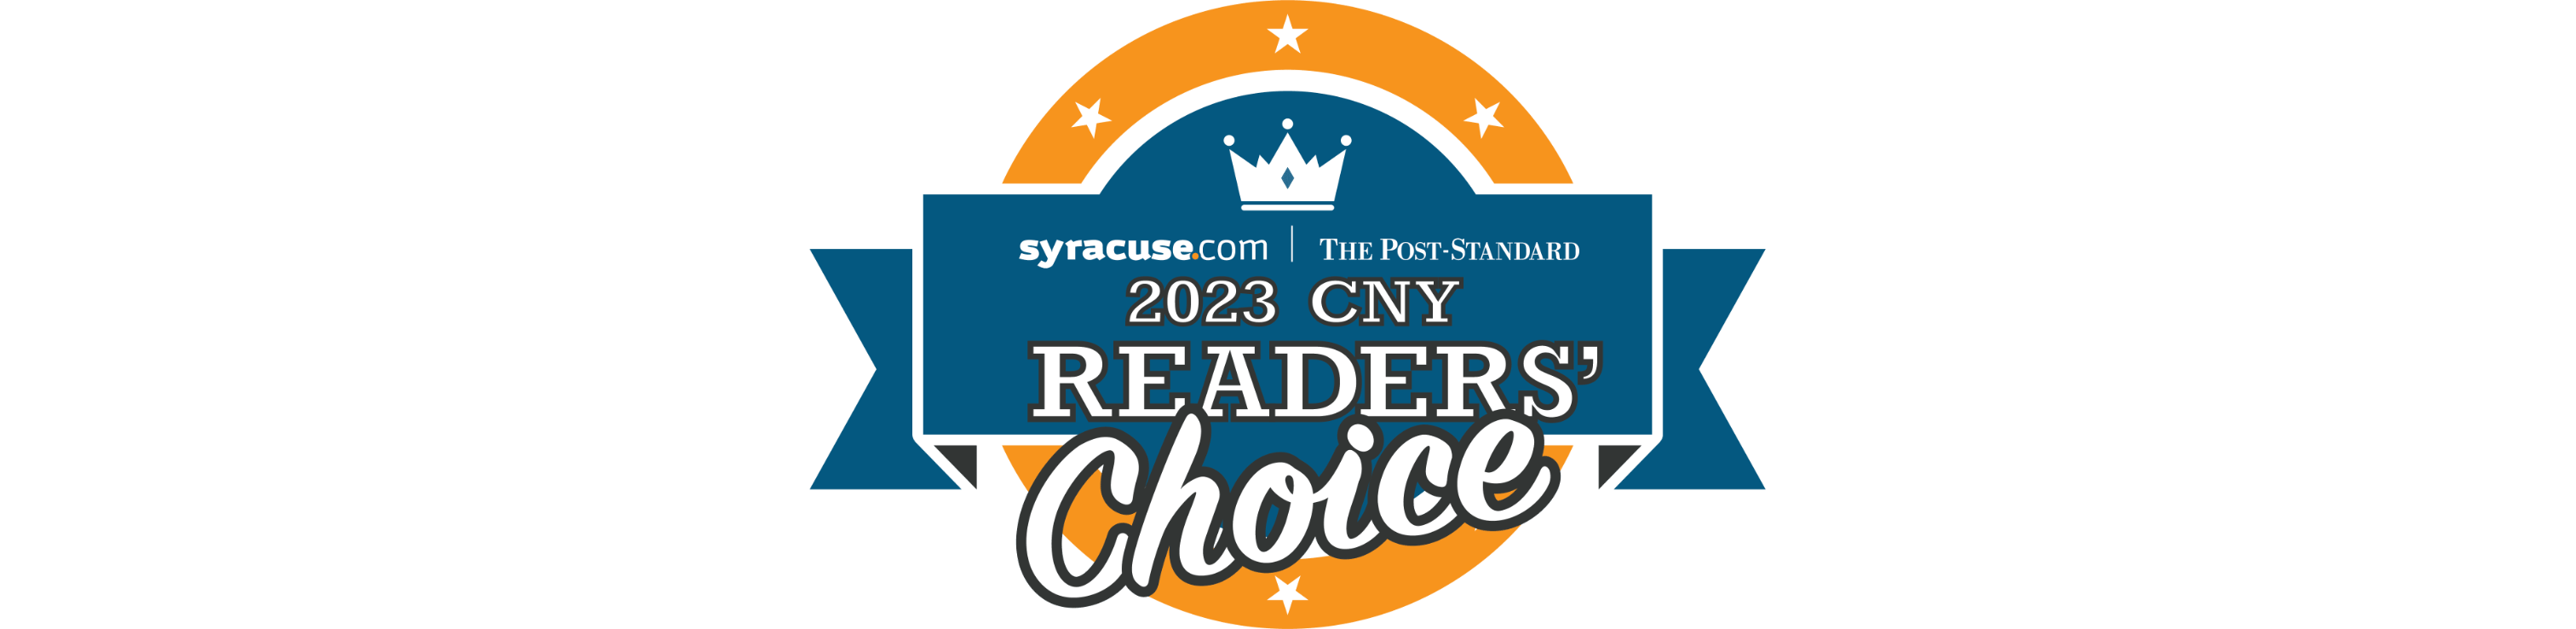 Manlius Cinema: Runner up in the 2023 Syracuse.com CNY Readers' Choice Awards for Best Entertainment Venue!